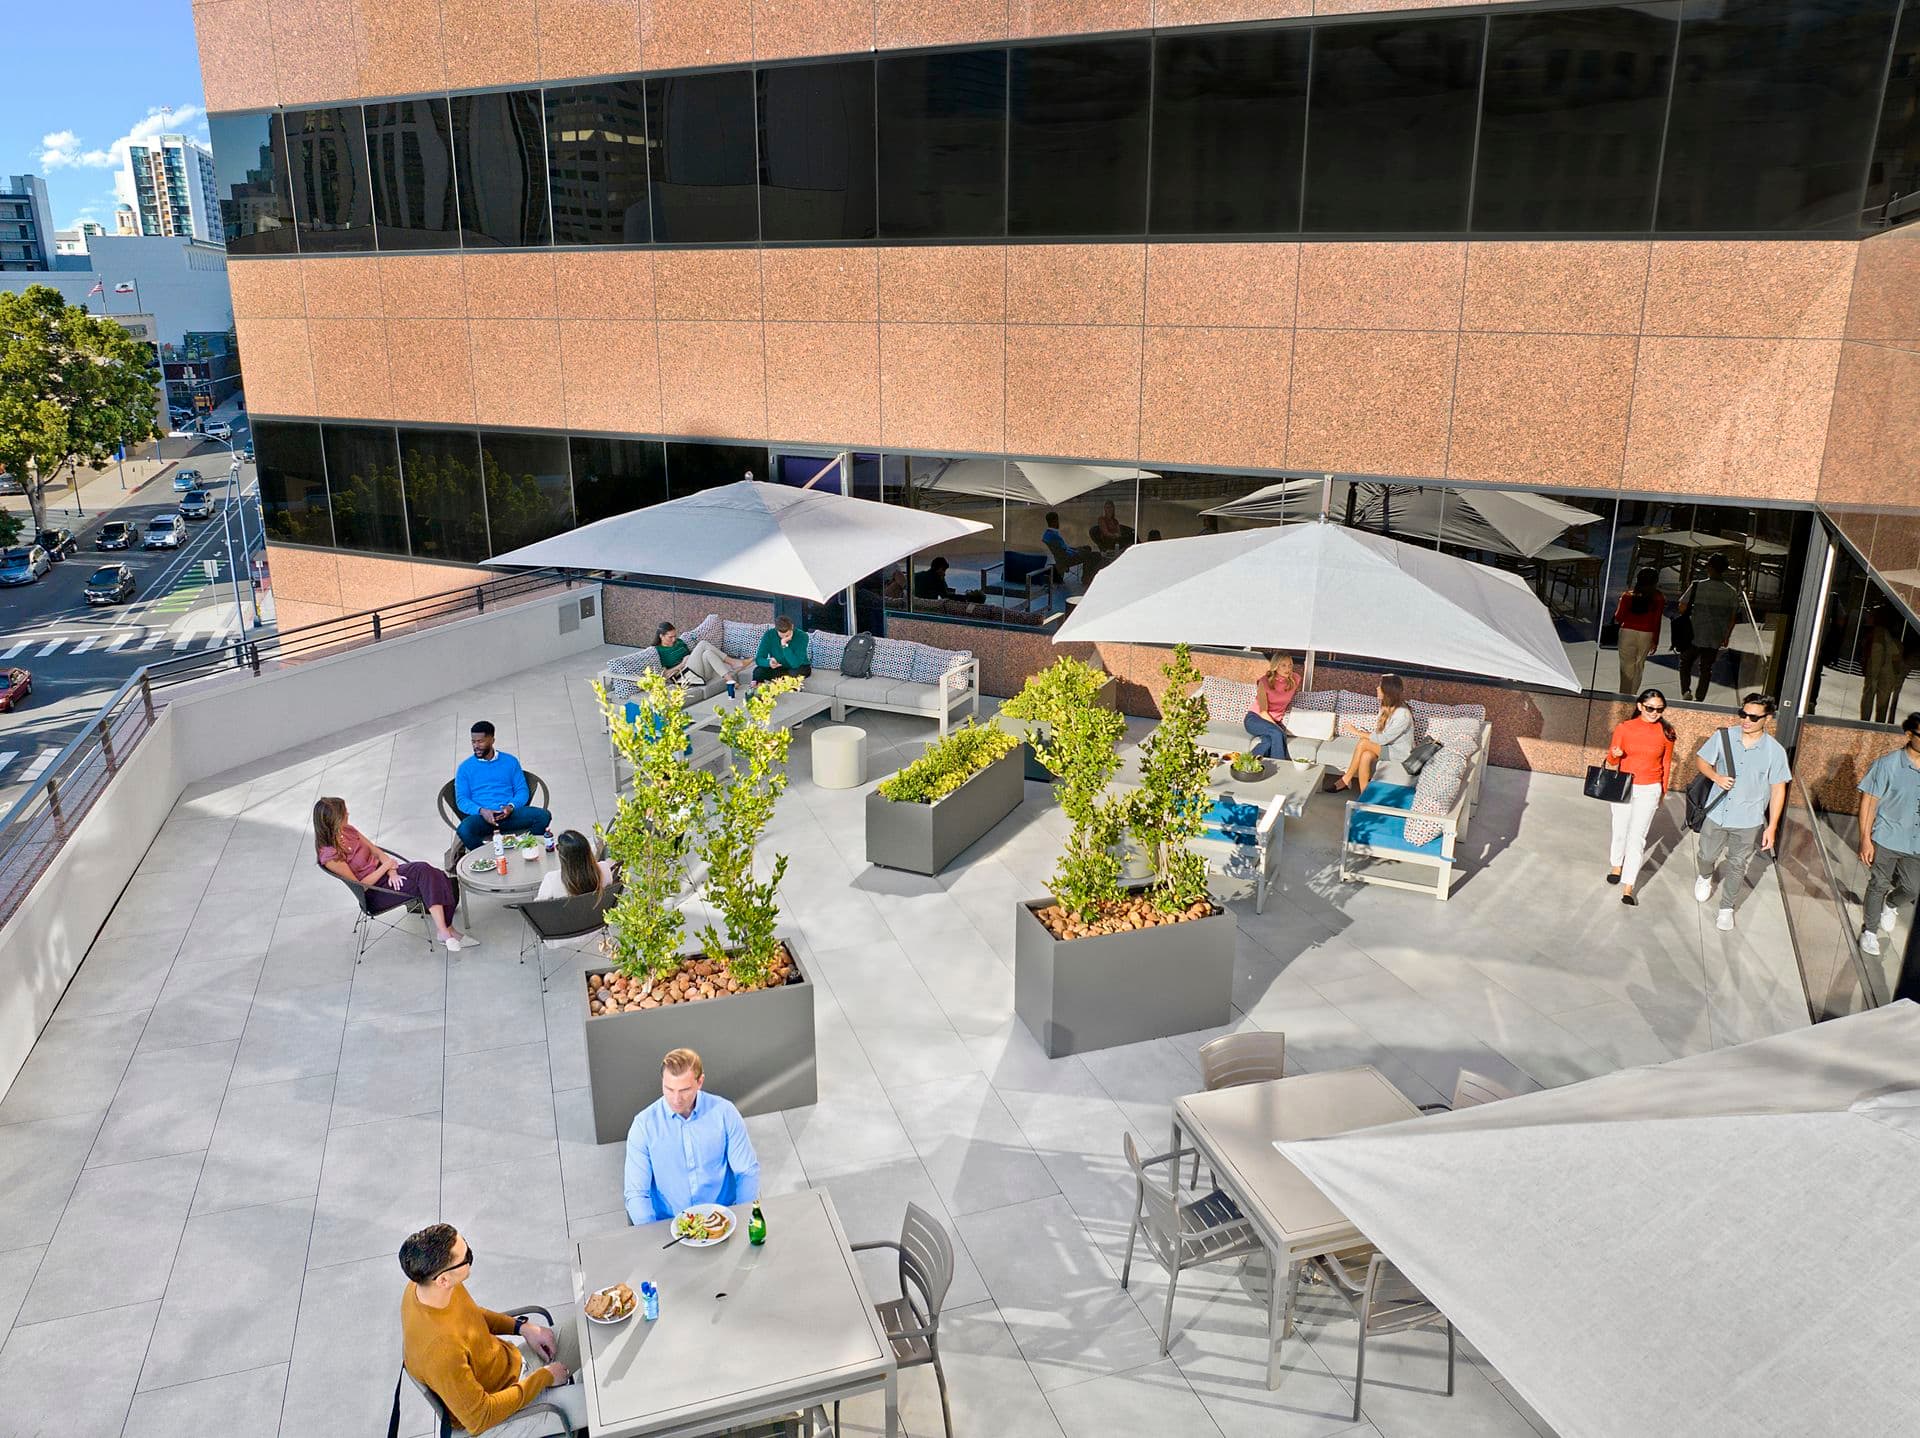 Exterior lifestyle photography of the outdoor workspace at Wells Fargo Plaza in San Diego, CA.